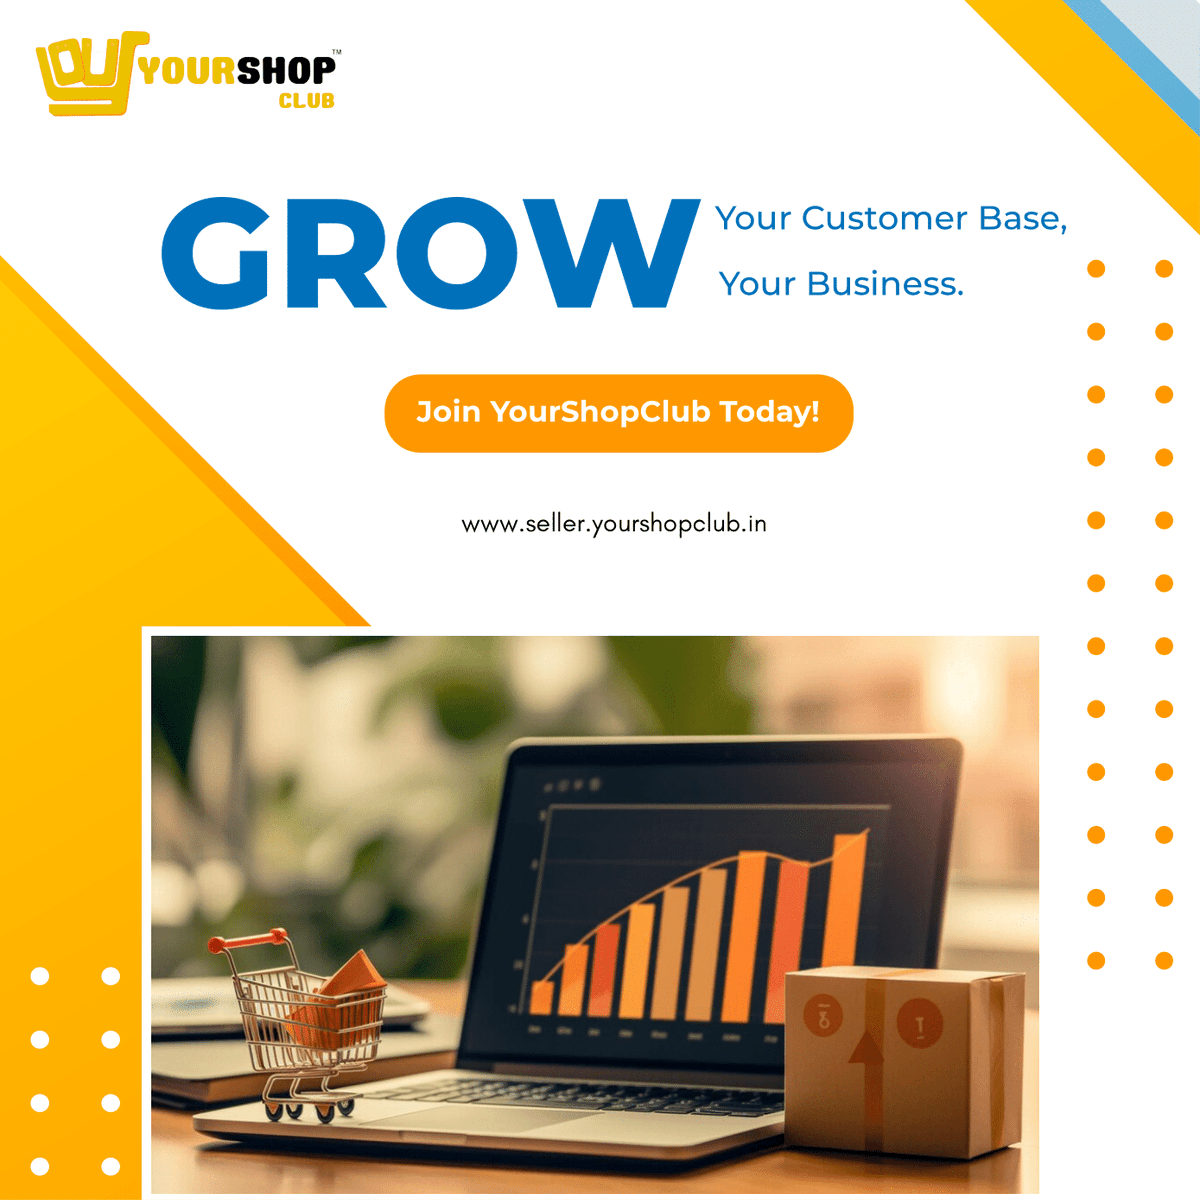 Expand Your Business with YourShopClub 🚀

#YourShopClub #GrowYourBusiness #OnlineMarketplace #JoinNow #ShopSmart #BoostSales #CustomerBase #BusinessGrowth #SellOnline #GrowWithUs